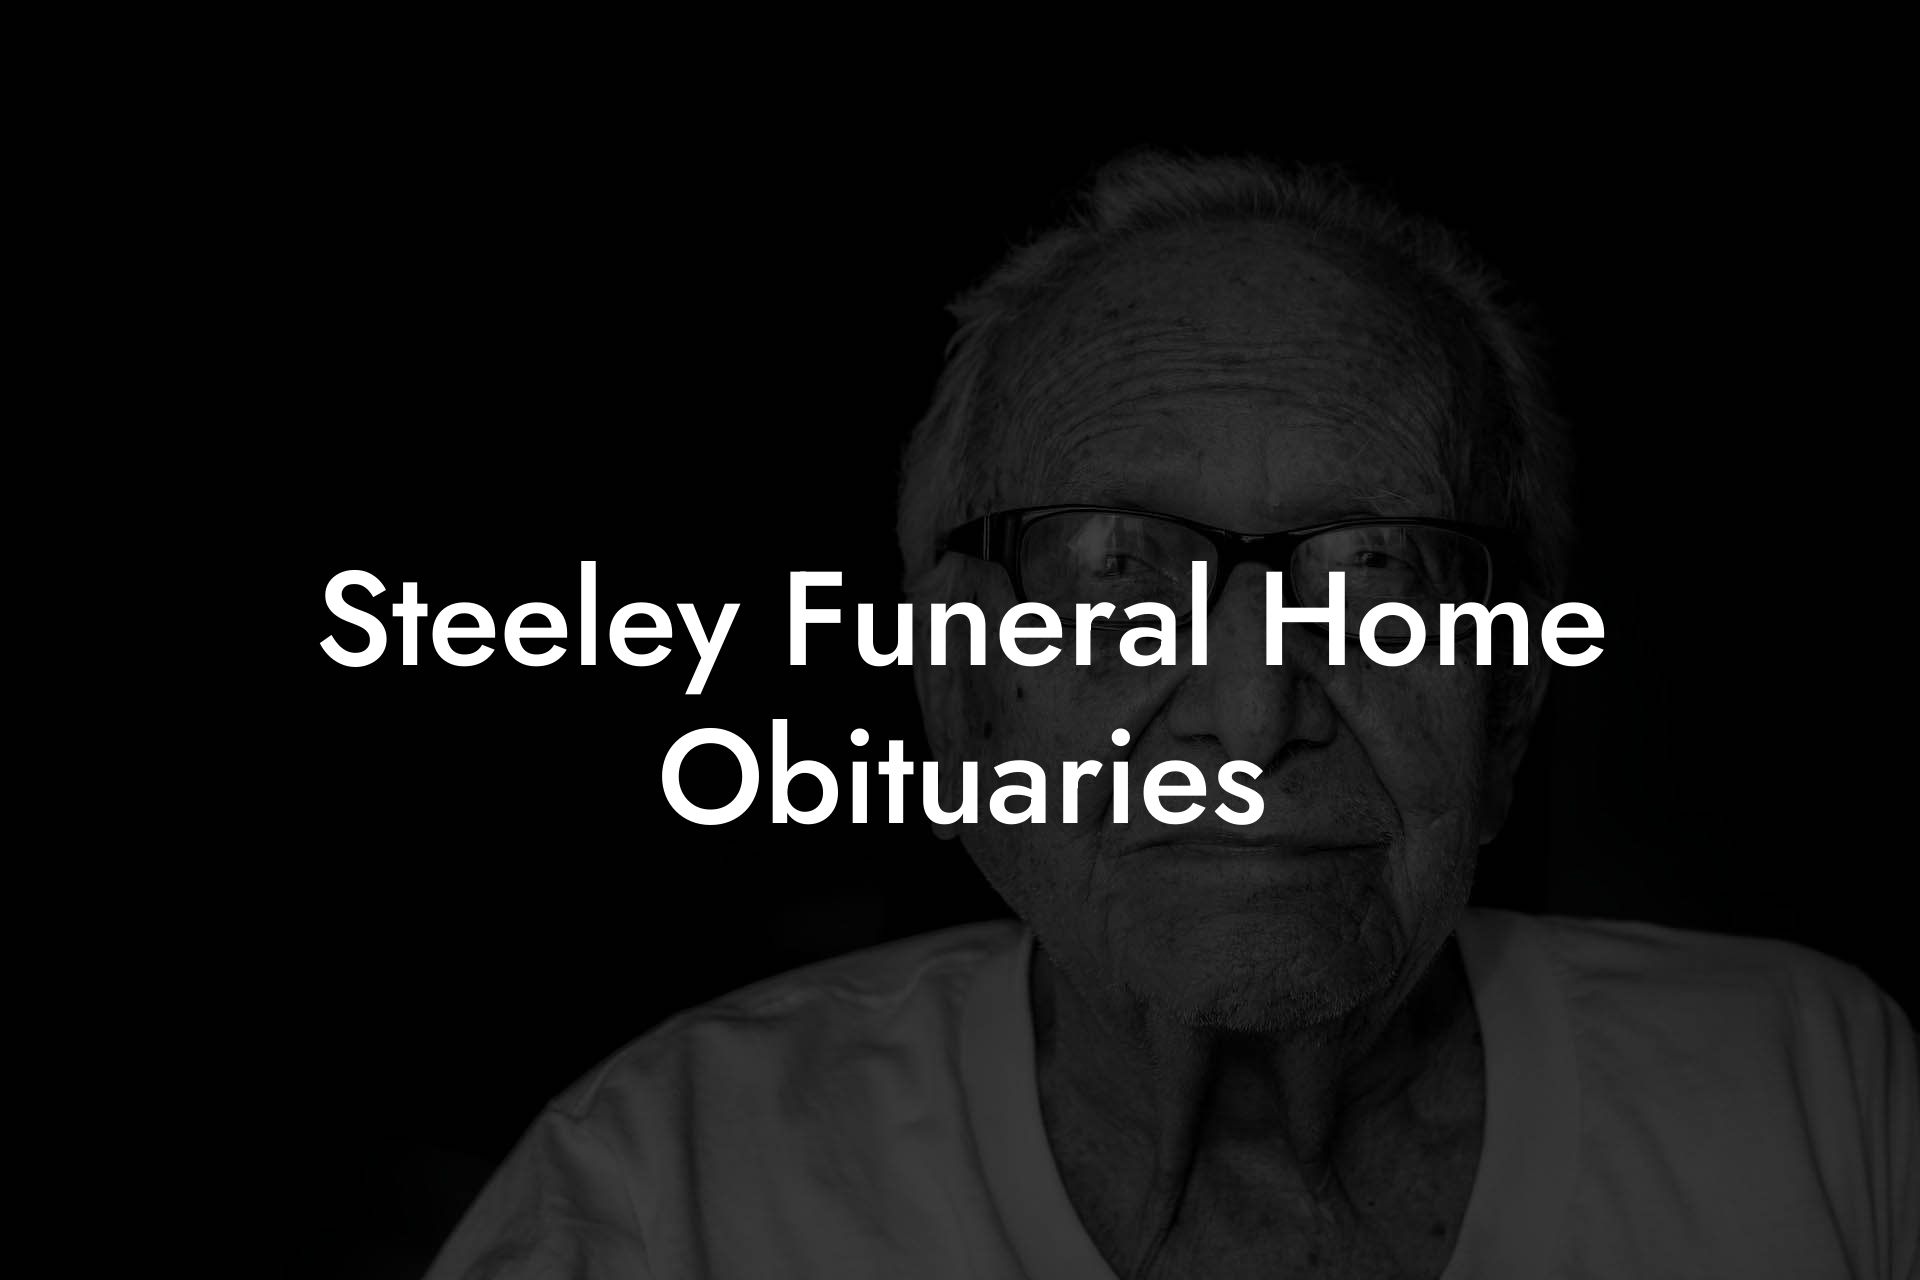 Steeley Funeral Home Obituaries